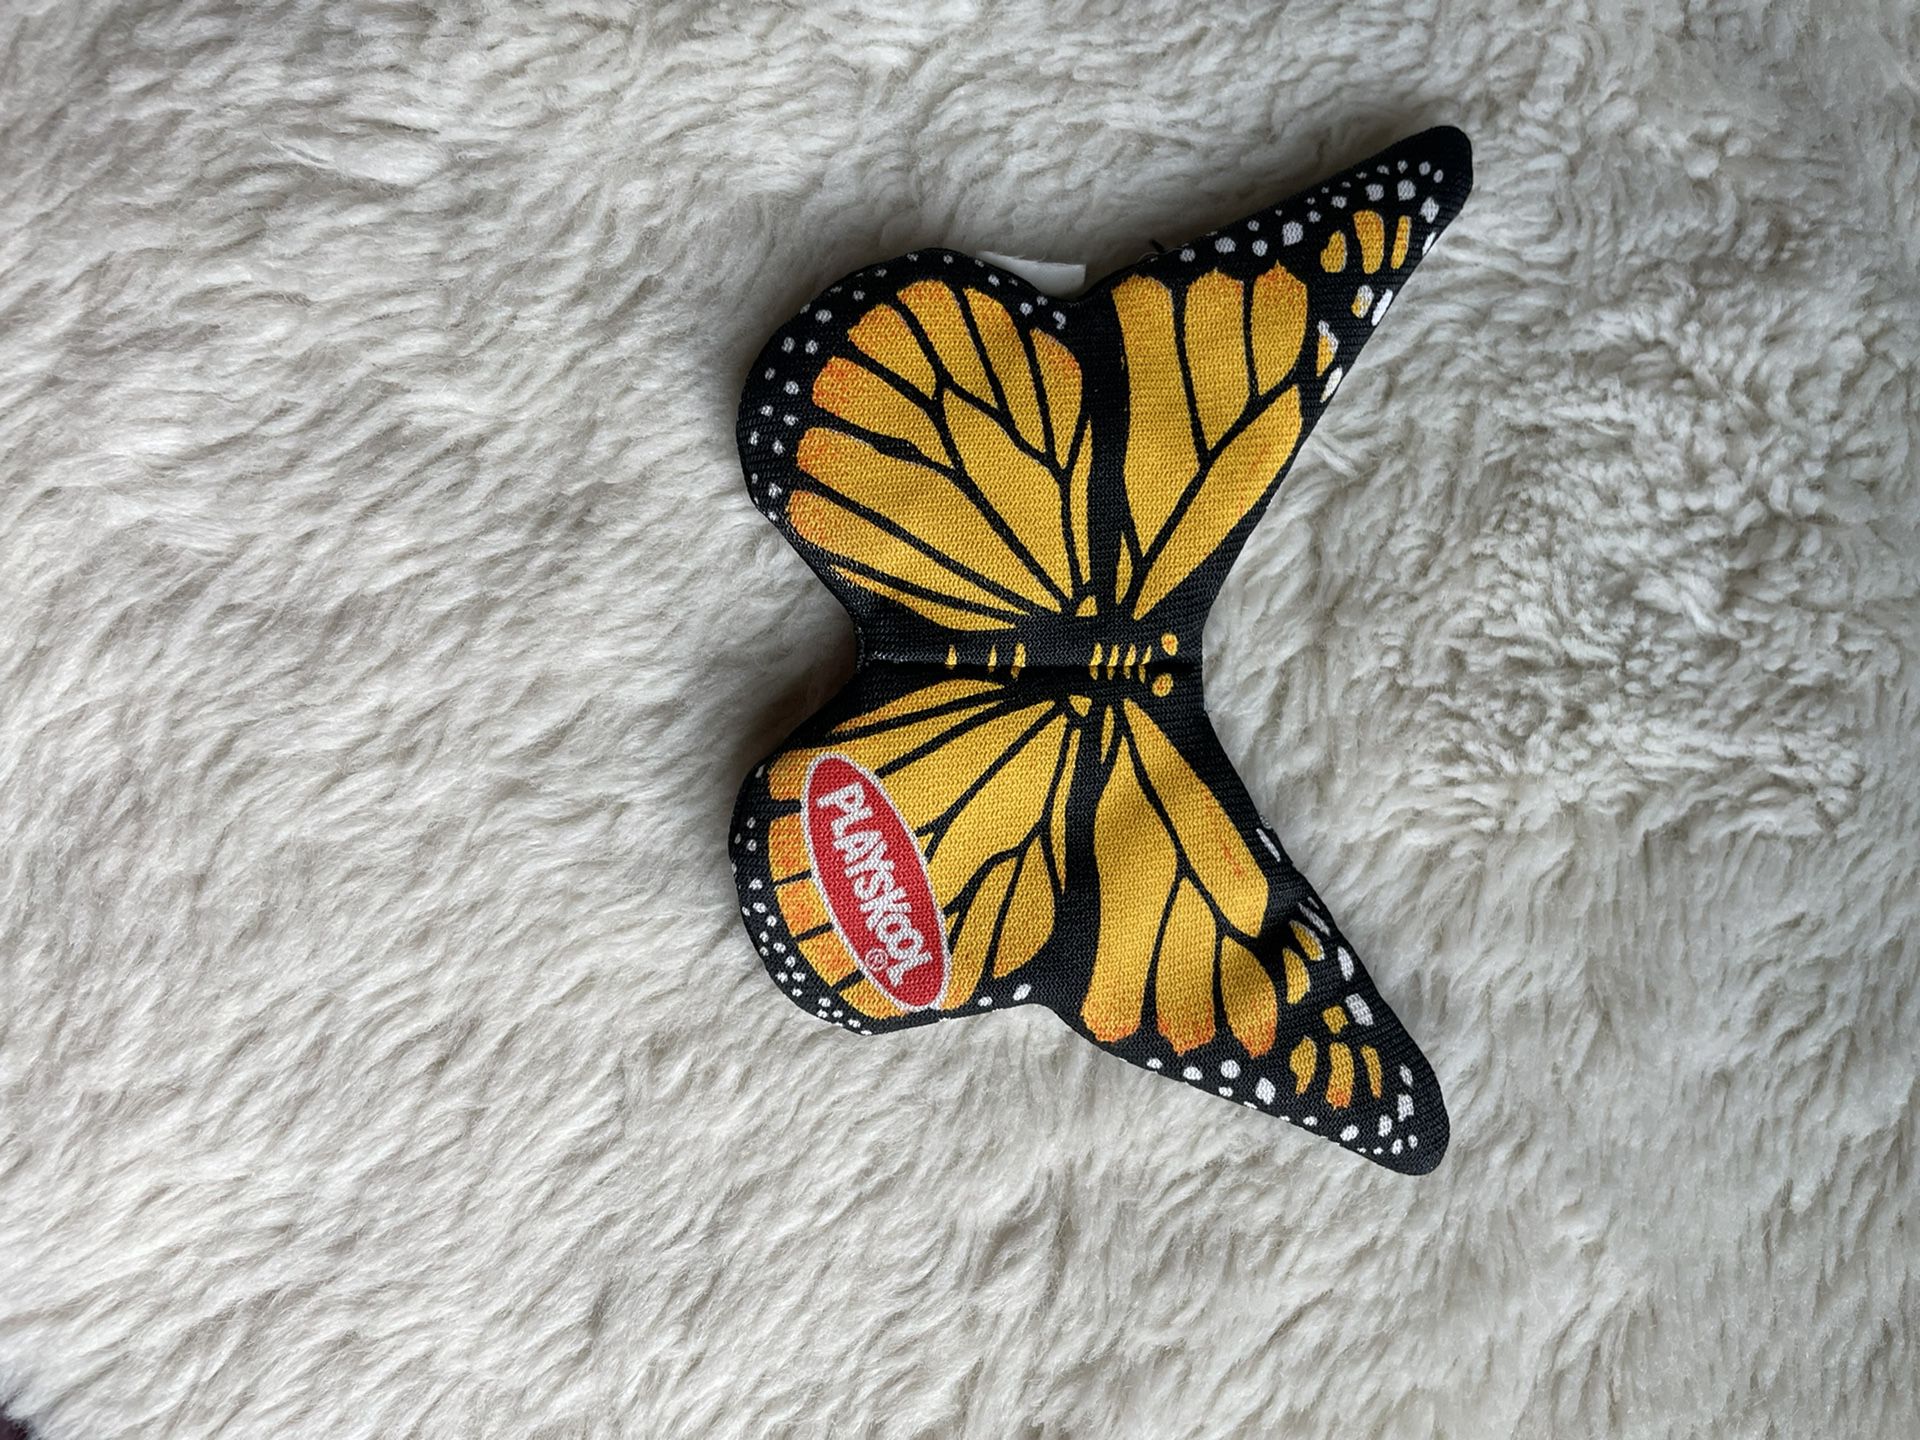 Playskool Vintage Monarch Butterfly Finger Puppet Orange Black Insect Play